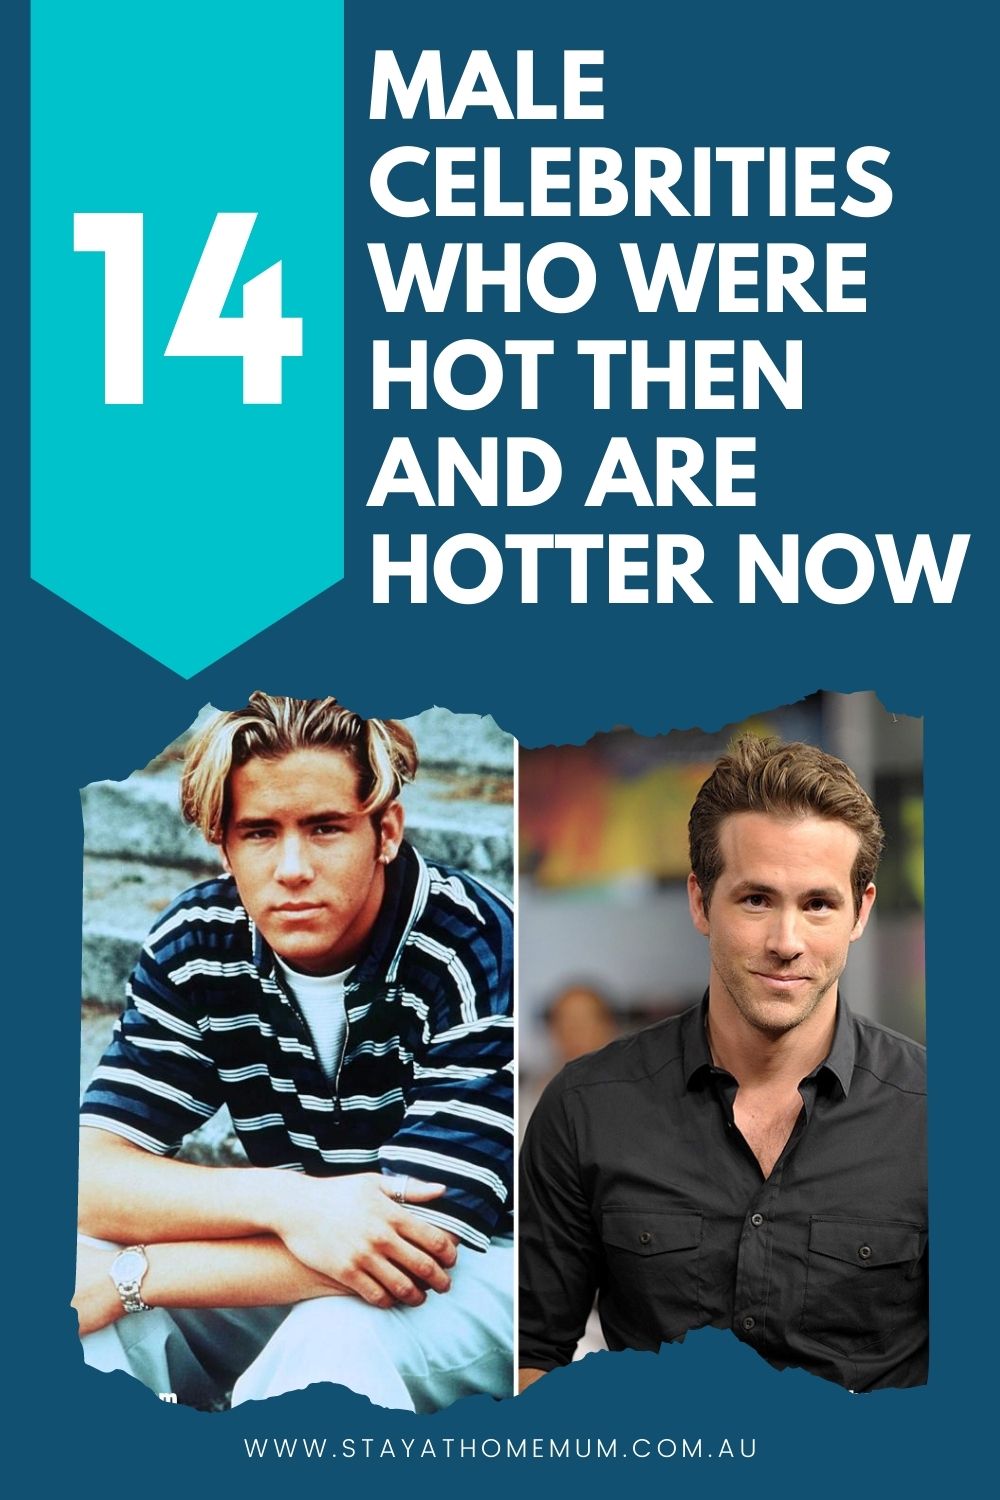 14 Male Celebrities Who Were Hot Then and Are Hotter Now | Stay at Home Mum